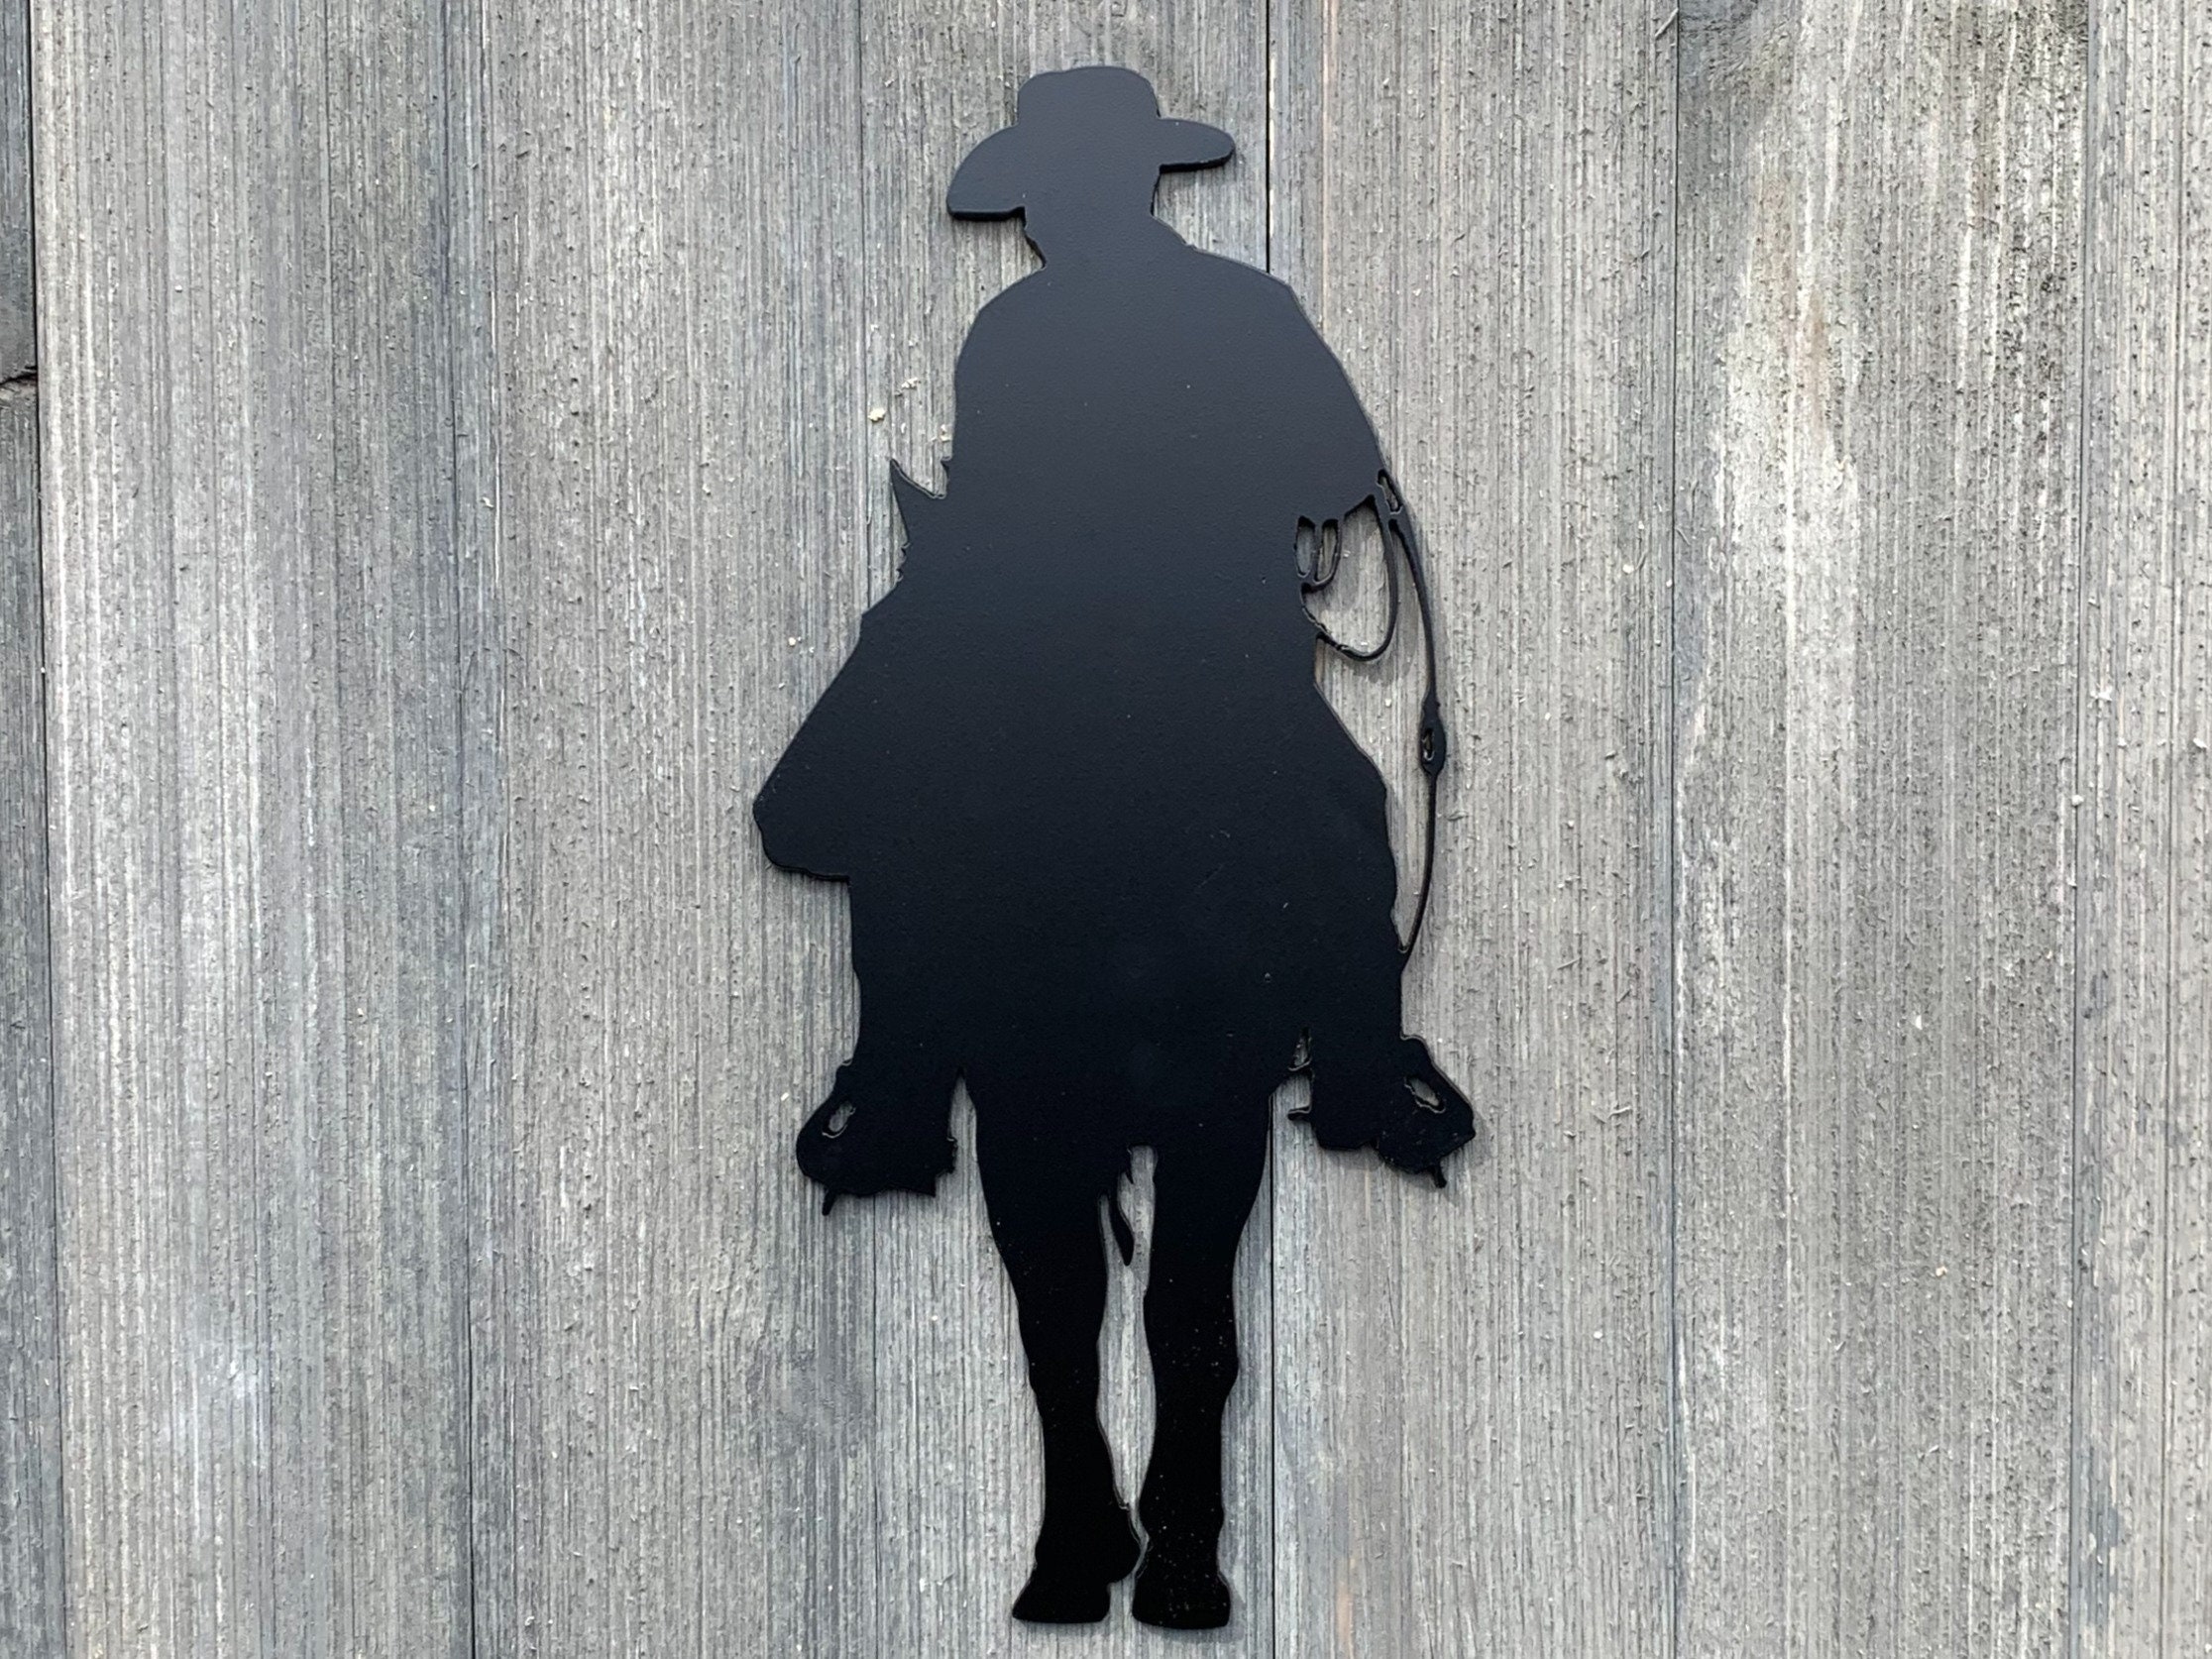 Mounted Cowboy Metal Sign Cutout - Cowboy on Horse Metal Sign - Western Home Decor - Horse Lover Gift - Cowboy Enthusiast - Durable